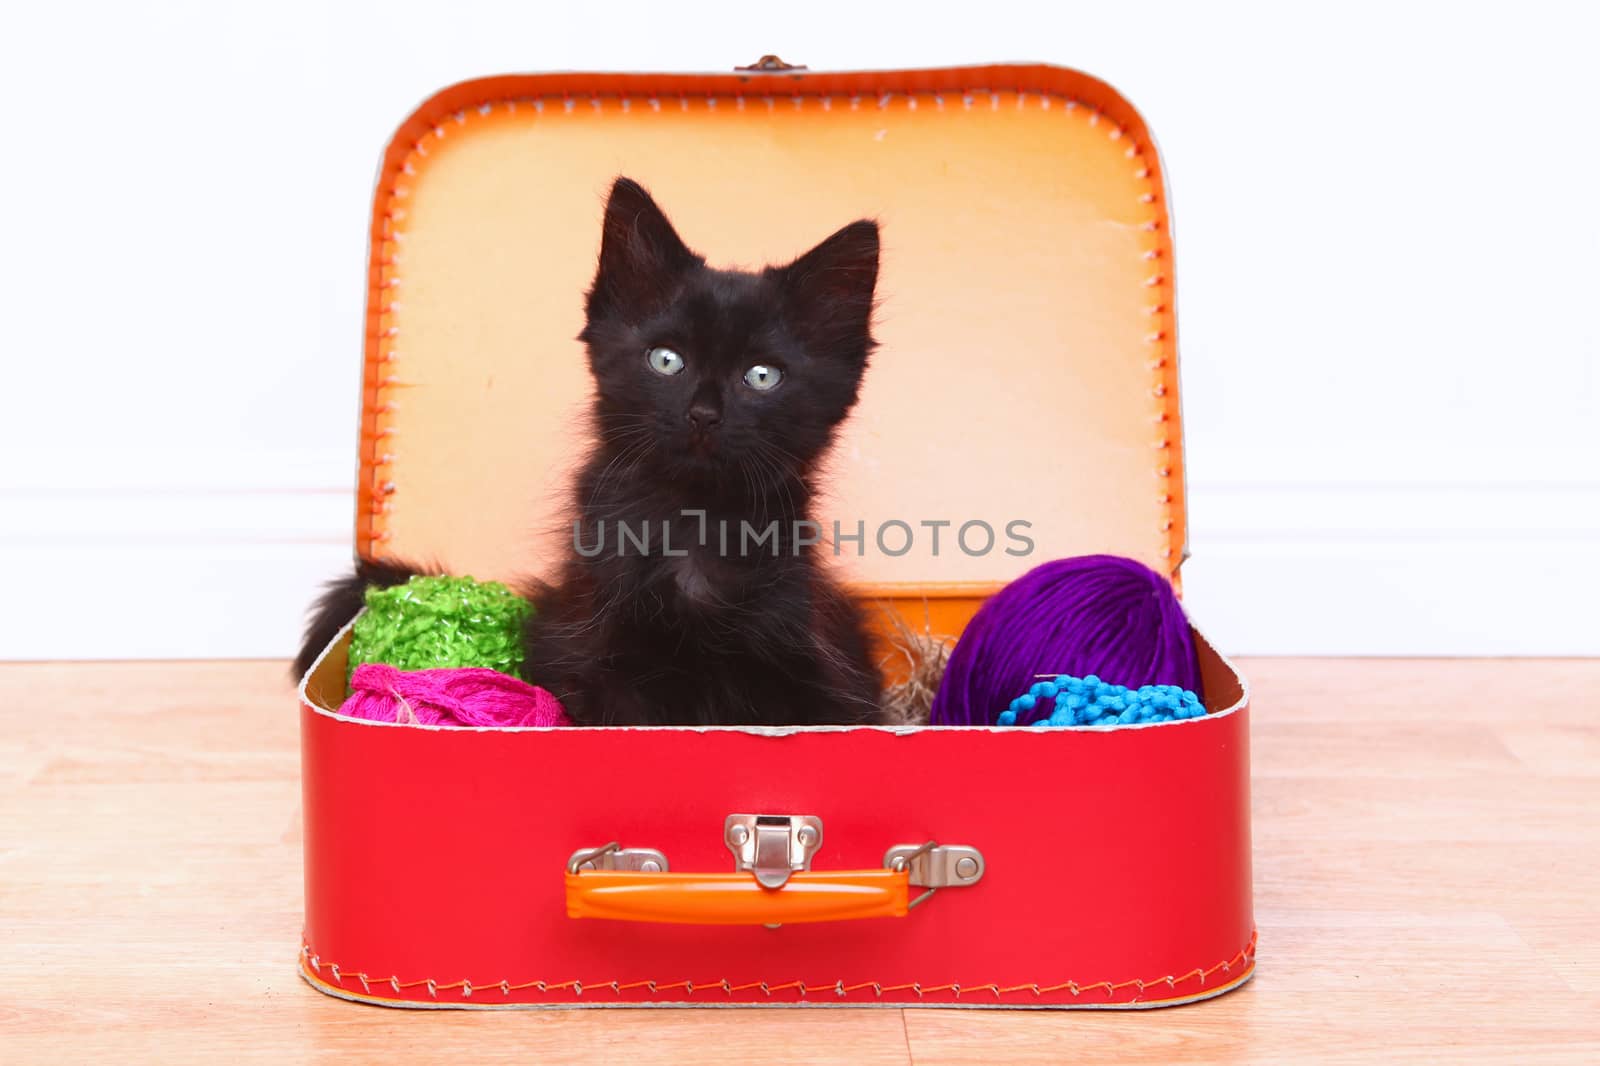 Kitten in a Case Filled with Yarn by tobkatrina